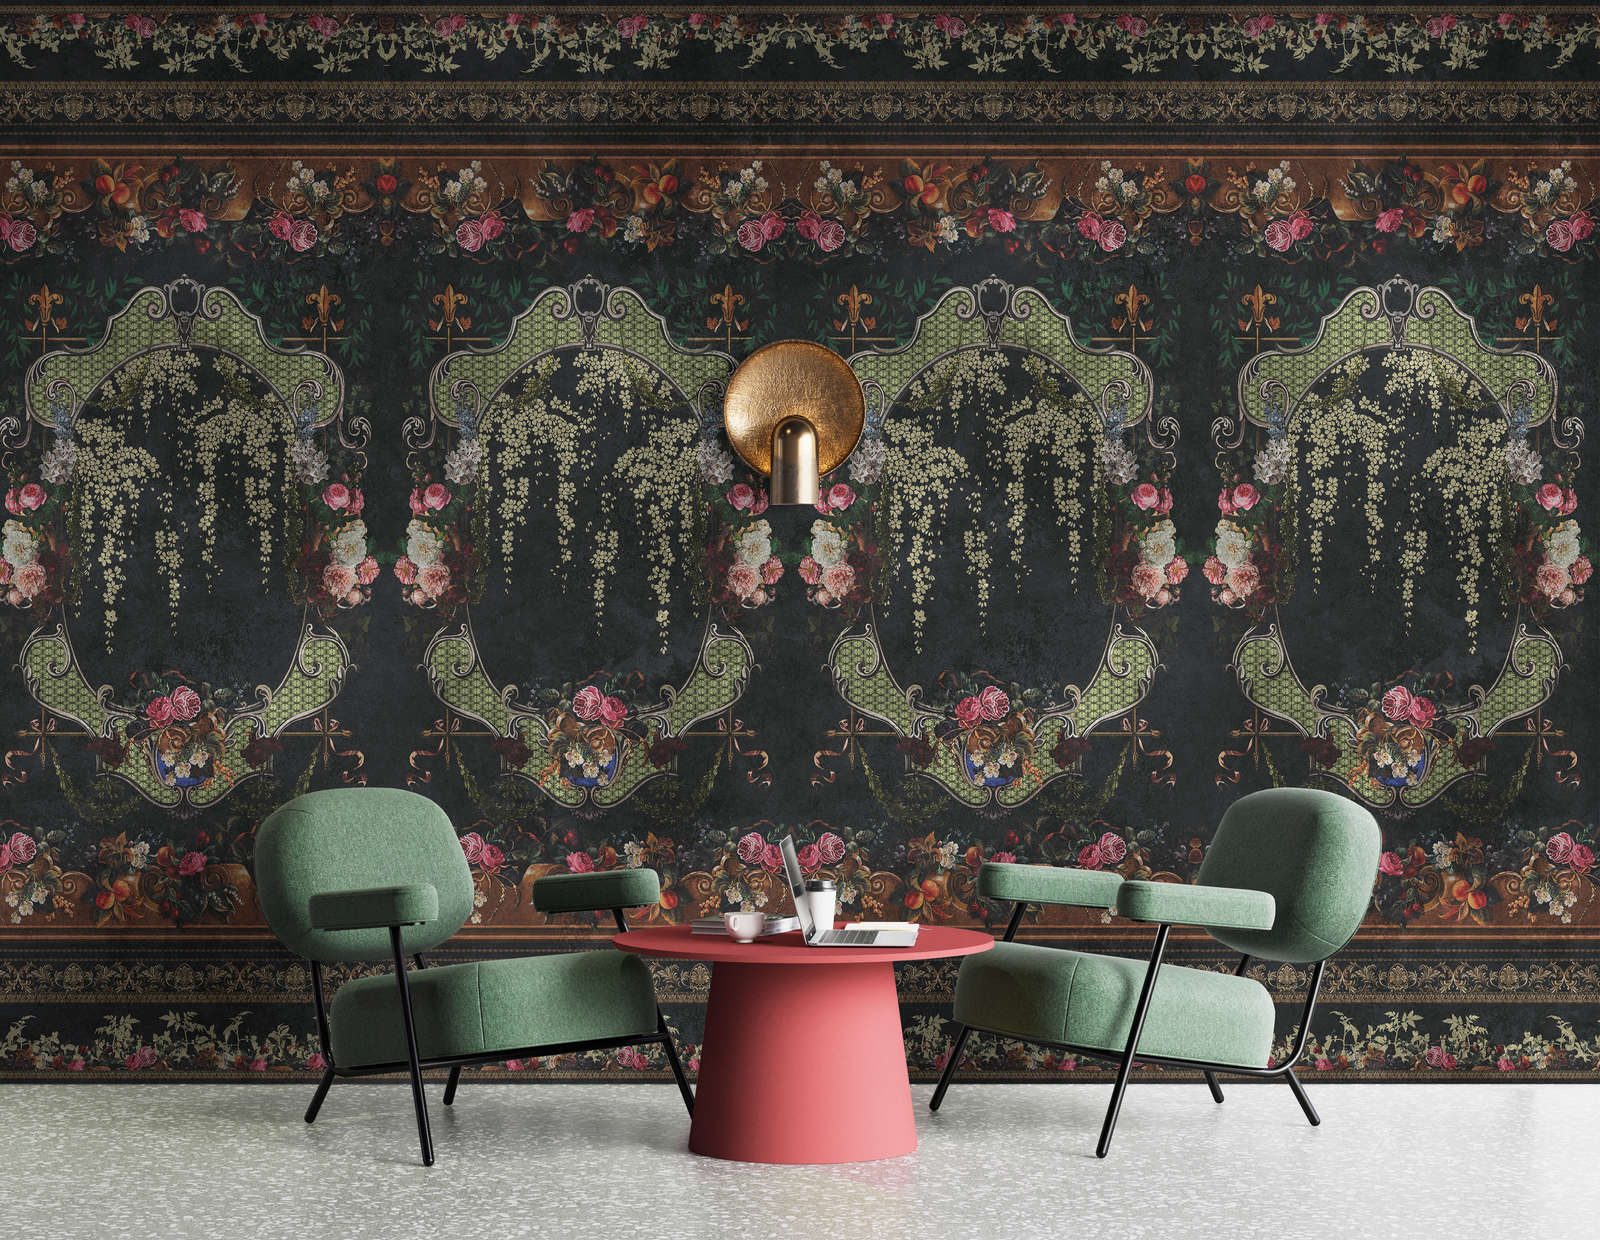             Photo wallpaper »babette« - Ornamental panelling with floral design on vintage plaster texture - red, dark blue | Smooth, slightly shiny premium non-woven fabric
        